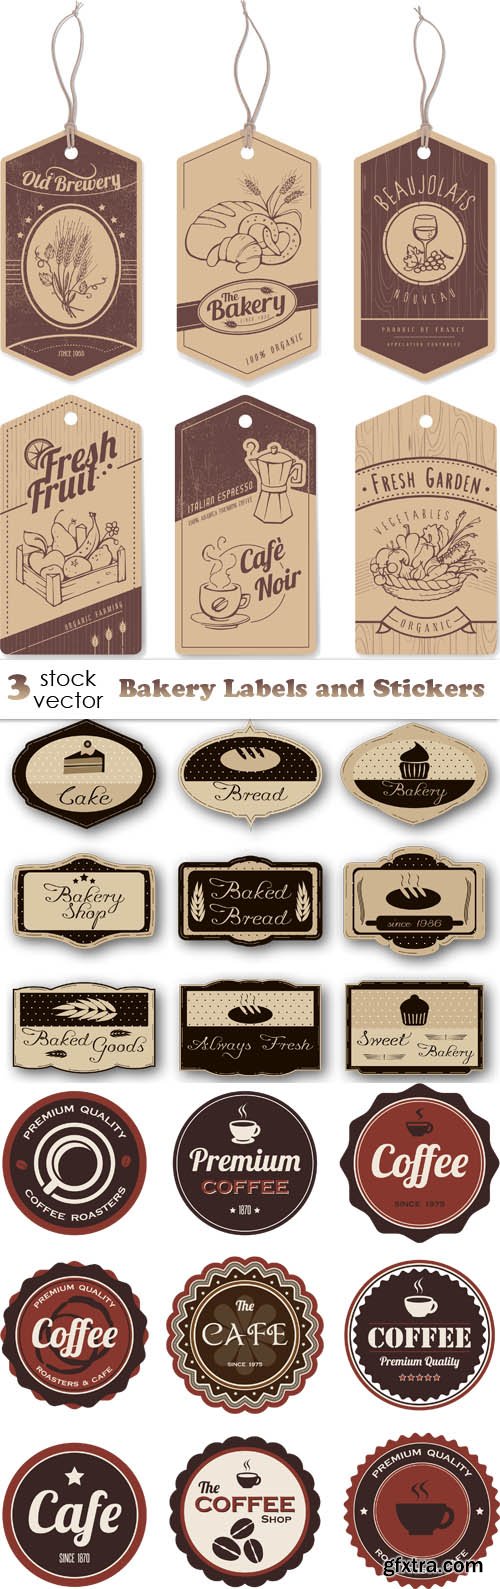 Vectors - Bakery Labels and Stickers